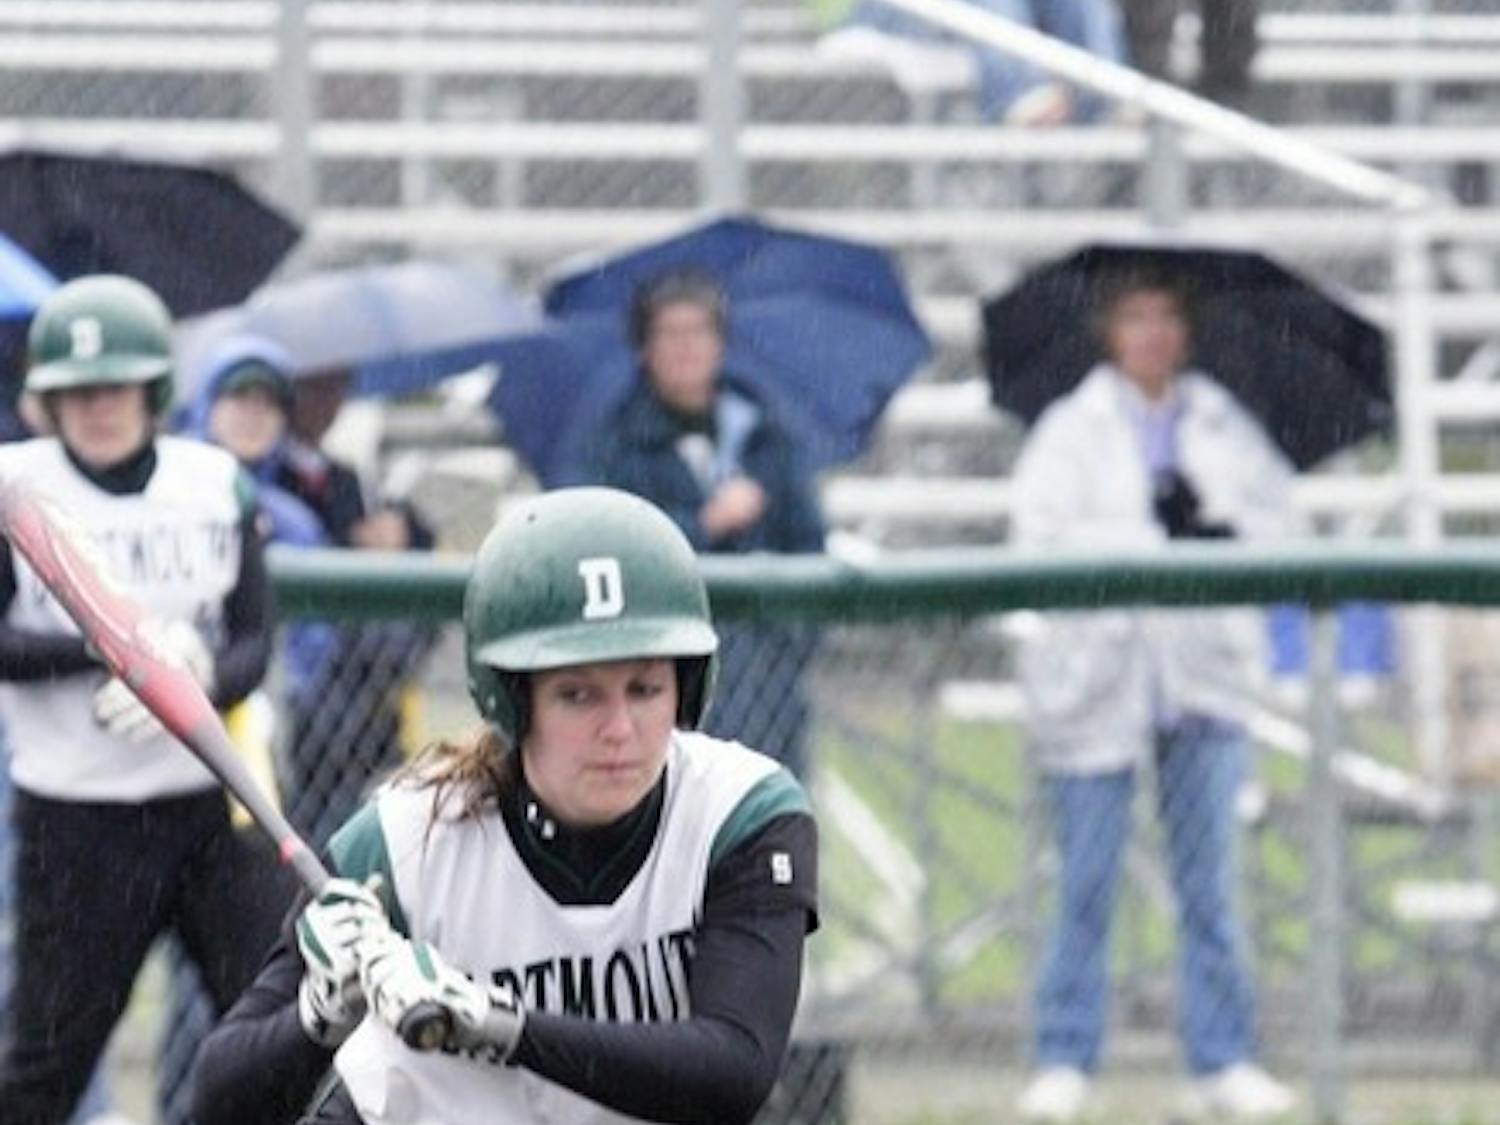 UMass pitchers rendered Dartmouth's bats silent Wednesday, as the team could not muster a single run in successive losses to the Minutewomen.